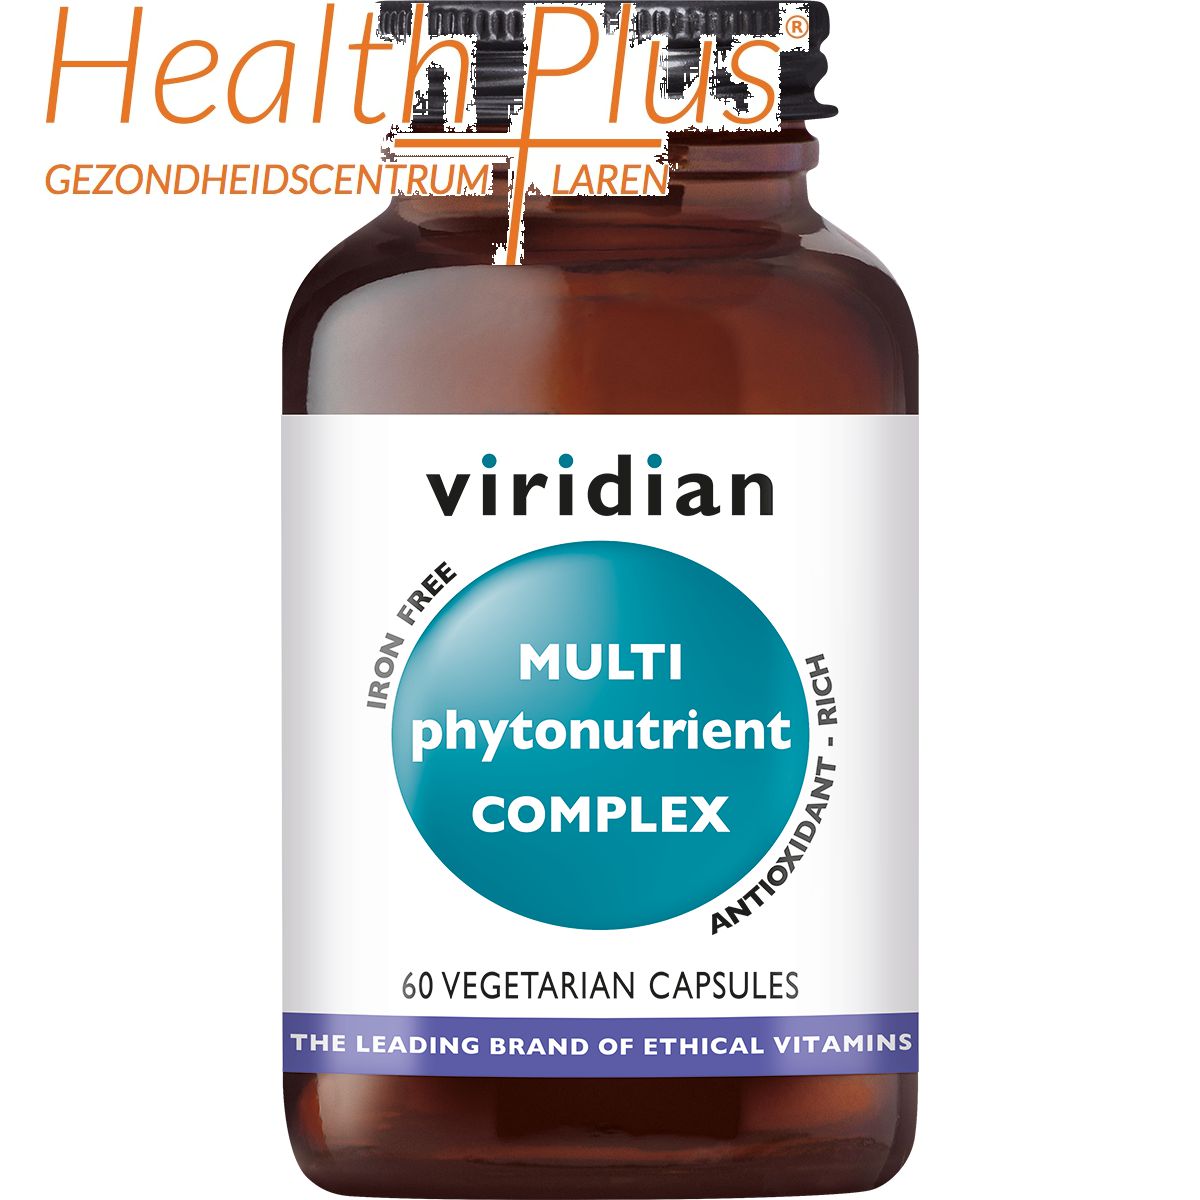 viridian multi phytonutrient complex 60 vcps